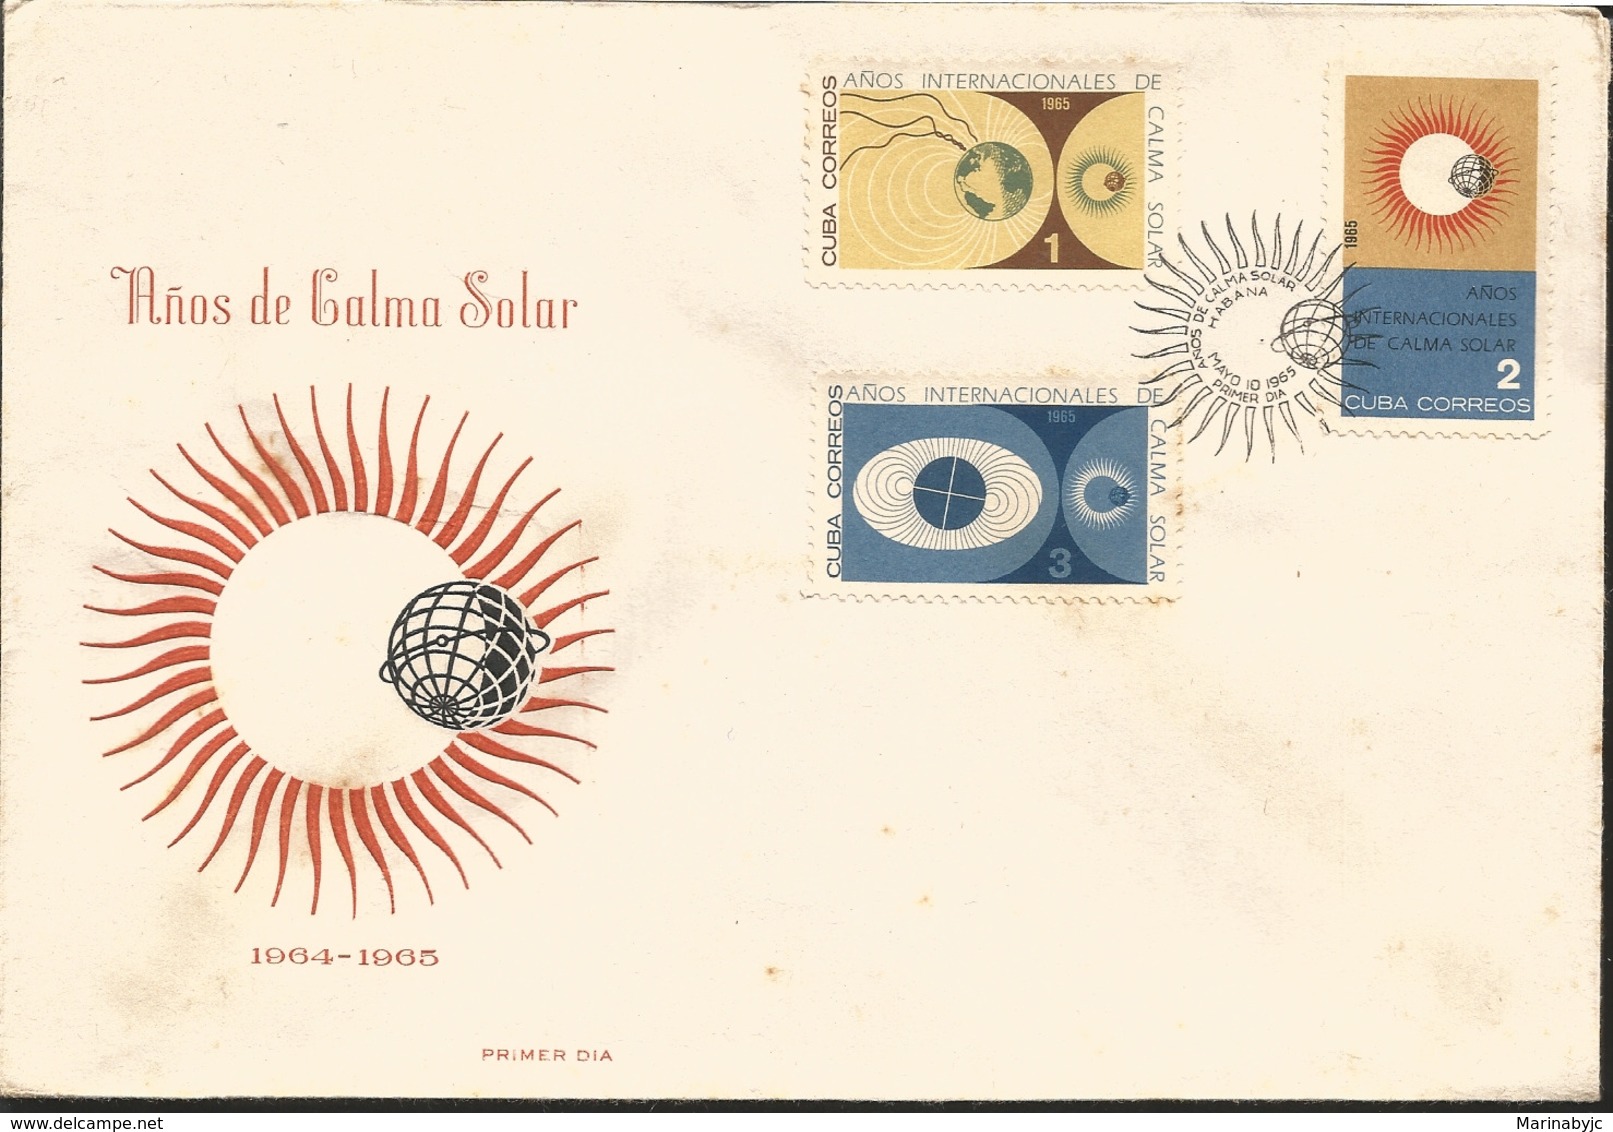 V) 1965 CARIBBEAN, INTERNATIONAL QUIET SUN YEAR, MAGNETIC POLE, SUN, EARTH’S, WITH SLOGAN CANCELATION IN BLACK, FDC - Lettres & Documents